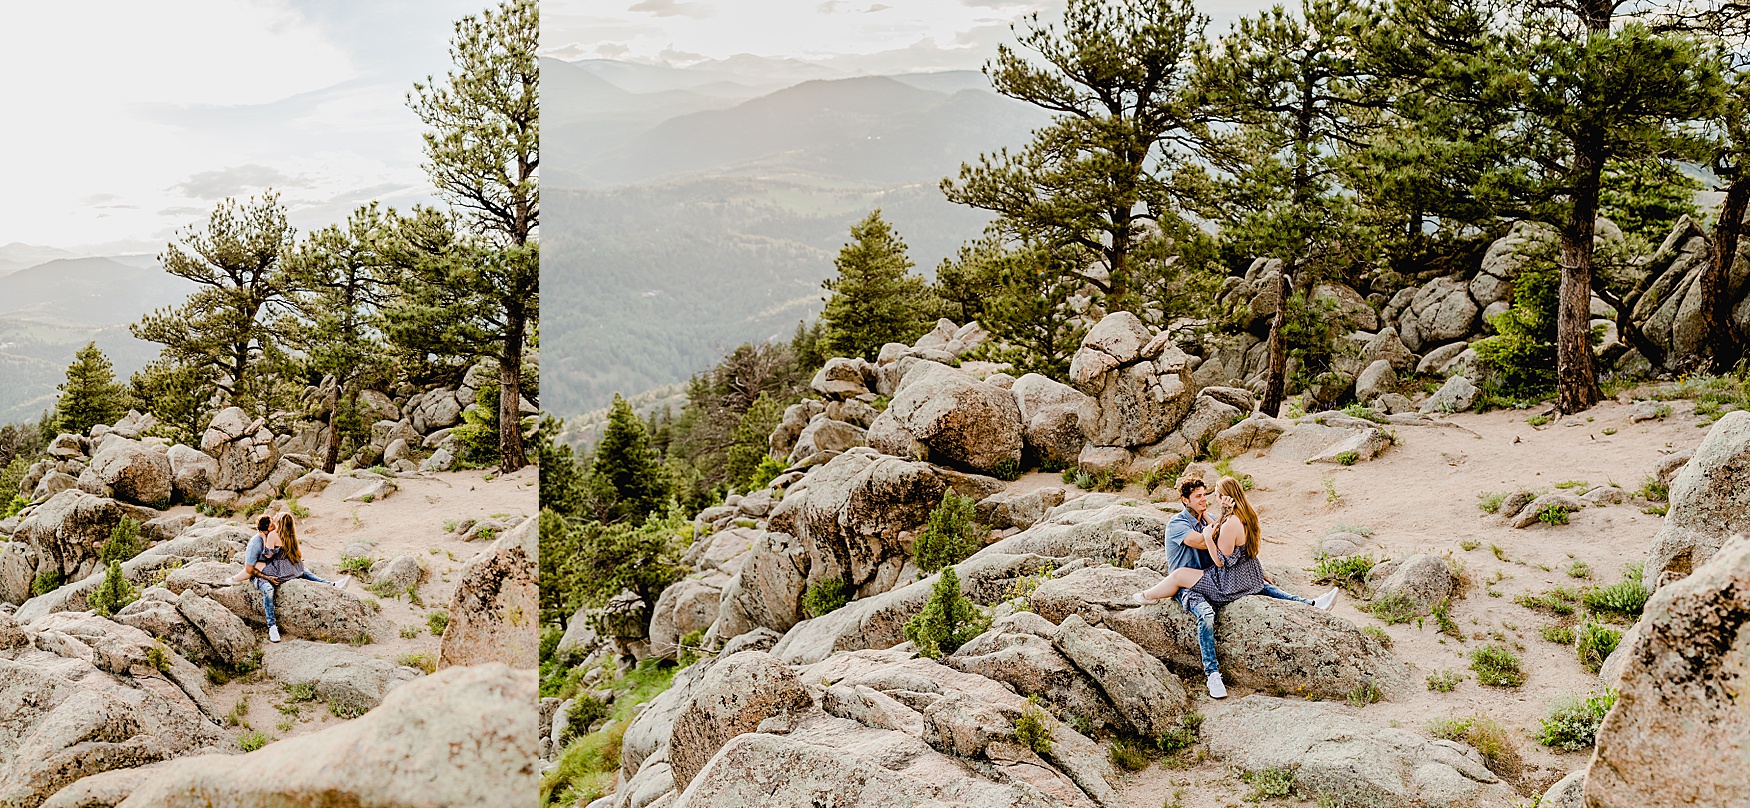 wide angle shot of couple sitting together with colorado trees, rocks, and mountains in the background